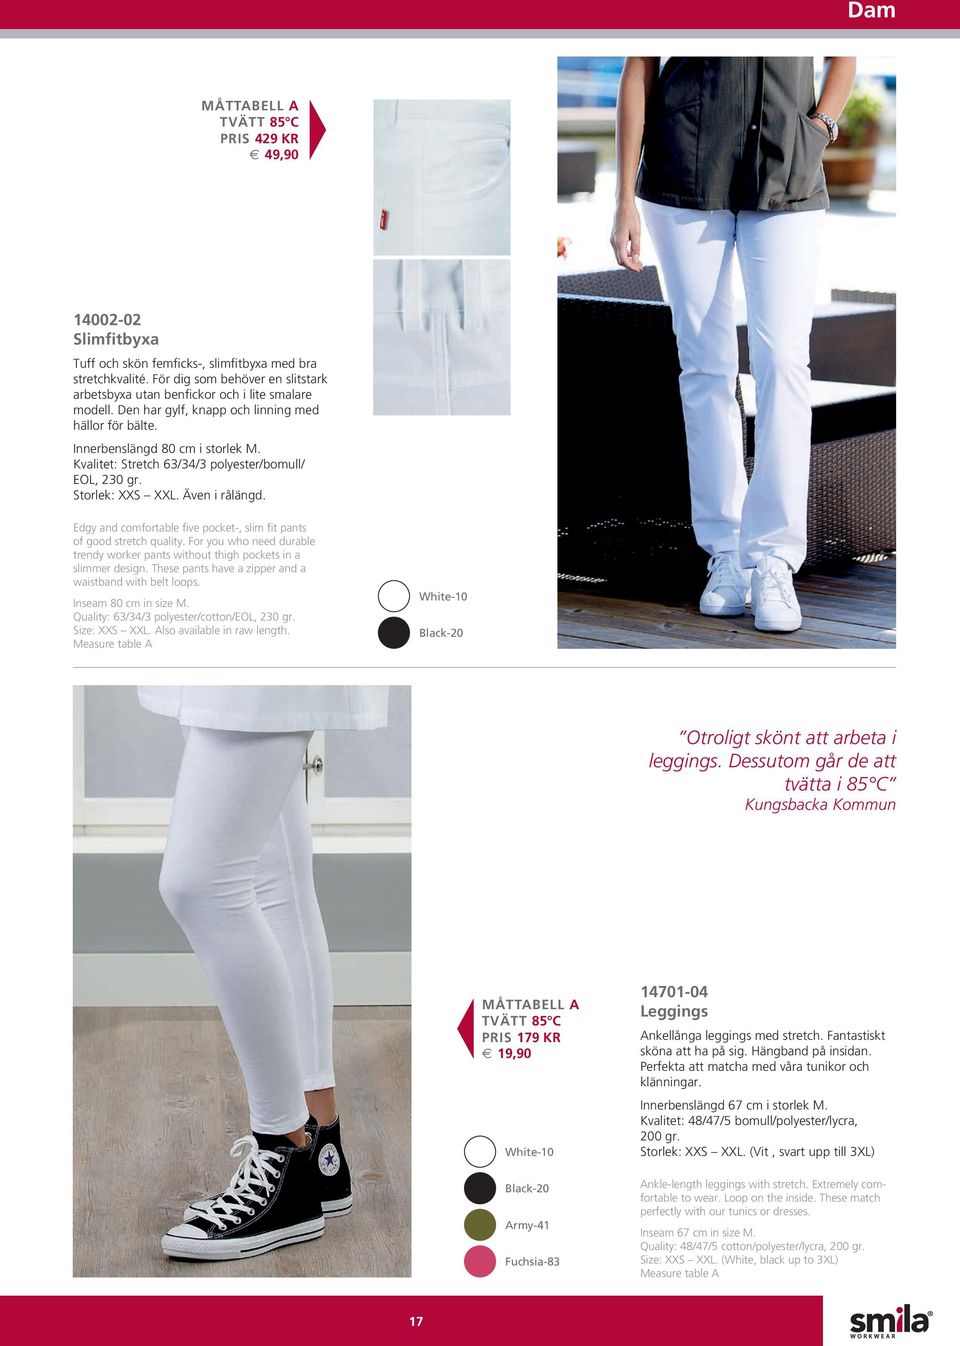 Edgy and comfortable five pocket-, slim fit pants of good stretch quality. For you who need durable trendy worker pants without thigh pockets in a slimmer design.